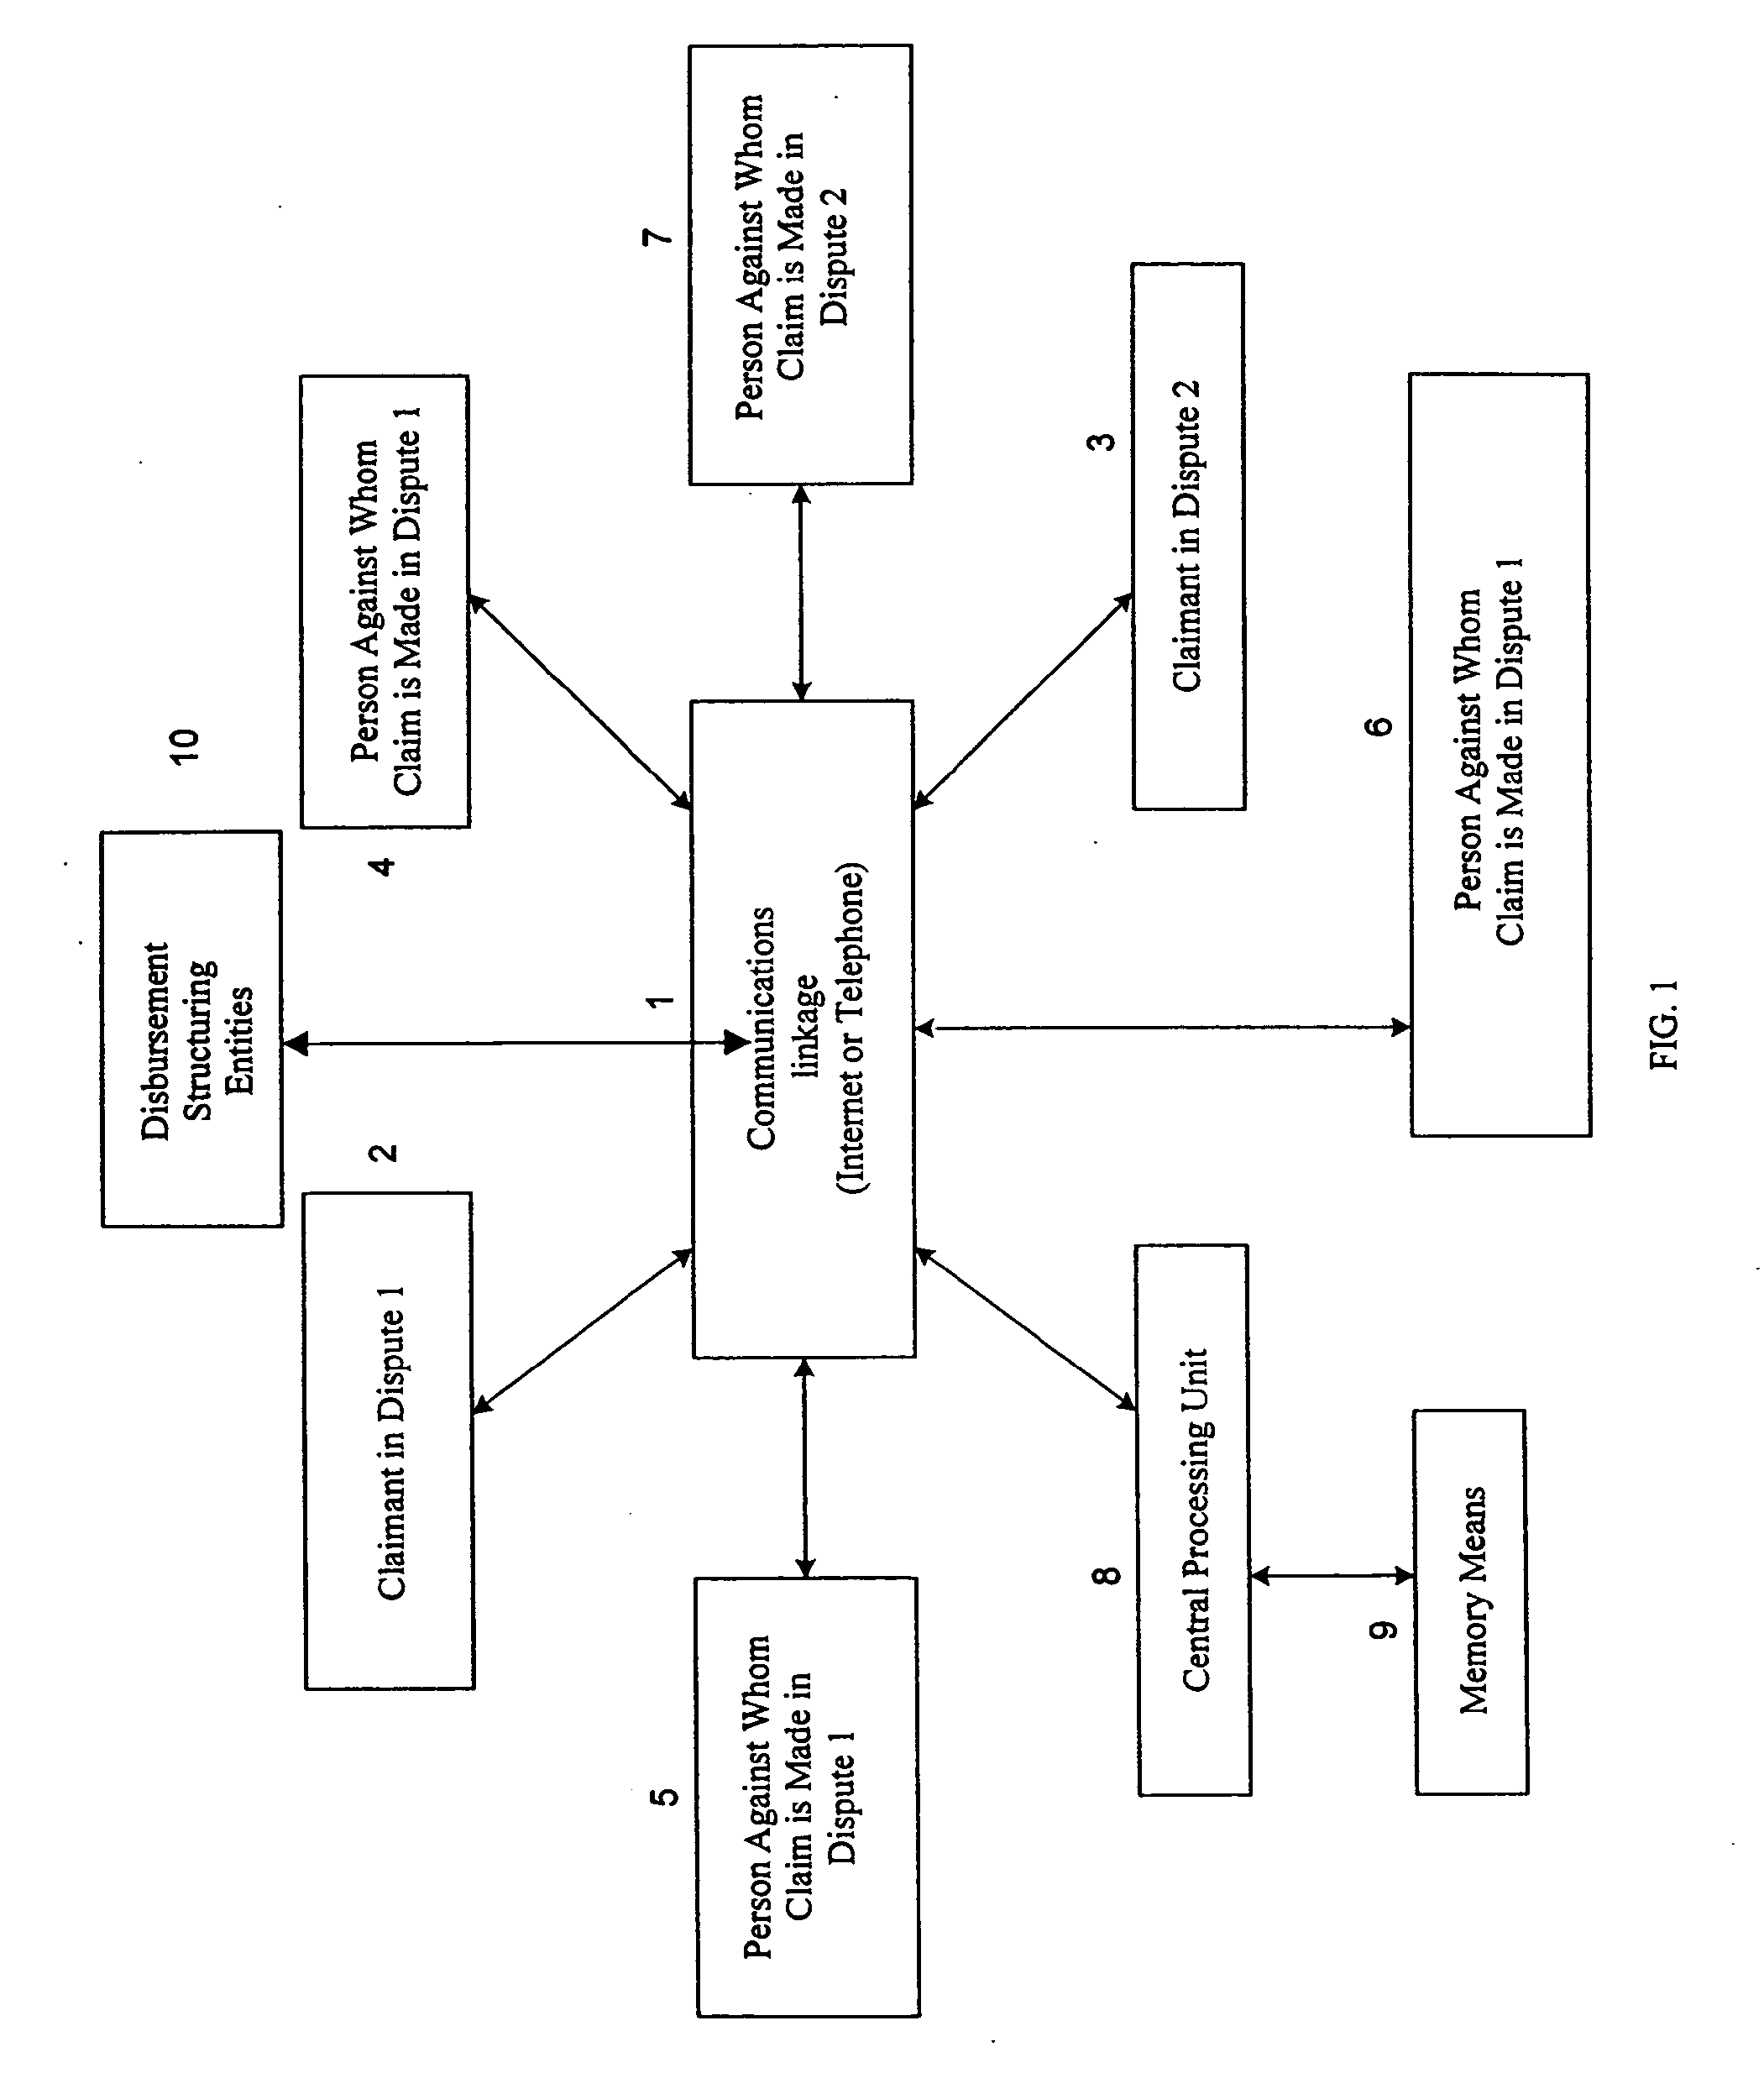 Computerized dispute resolution system and method